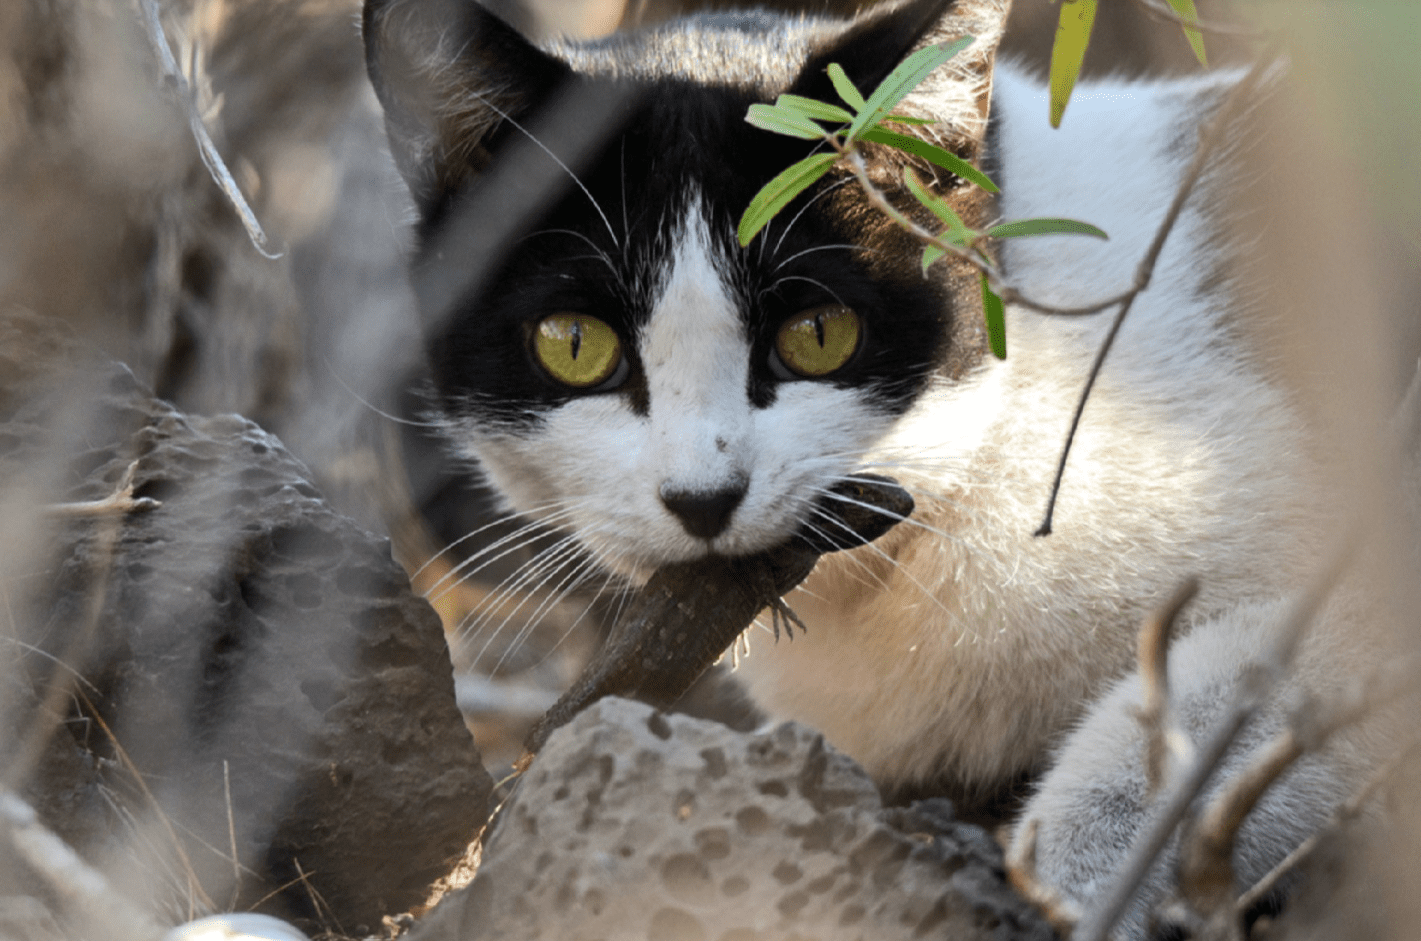 A stray cat captures an endemic lizard near a cat colony located in Tenerife.